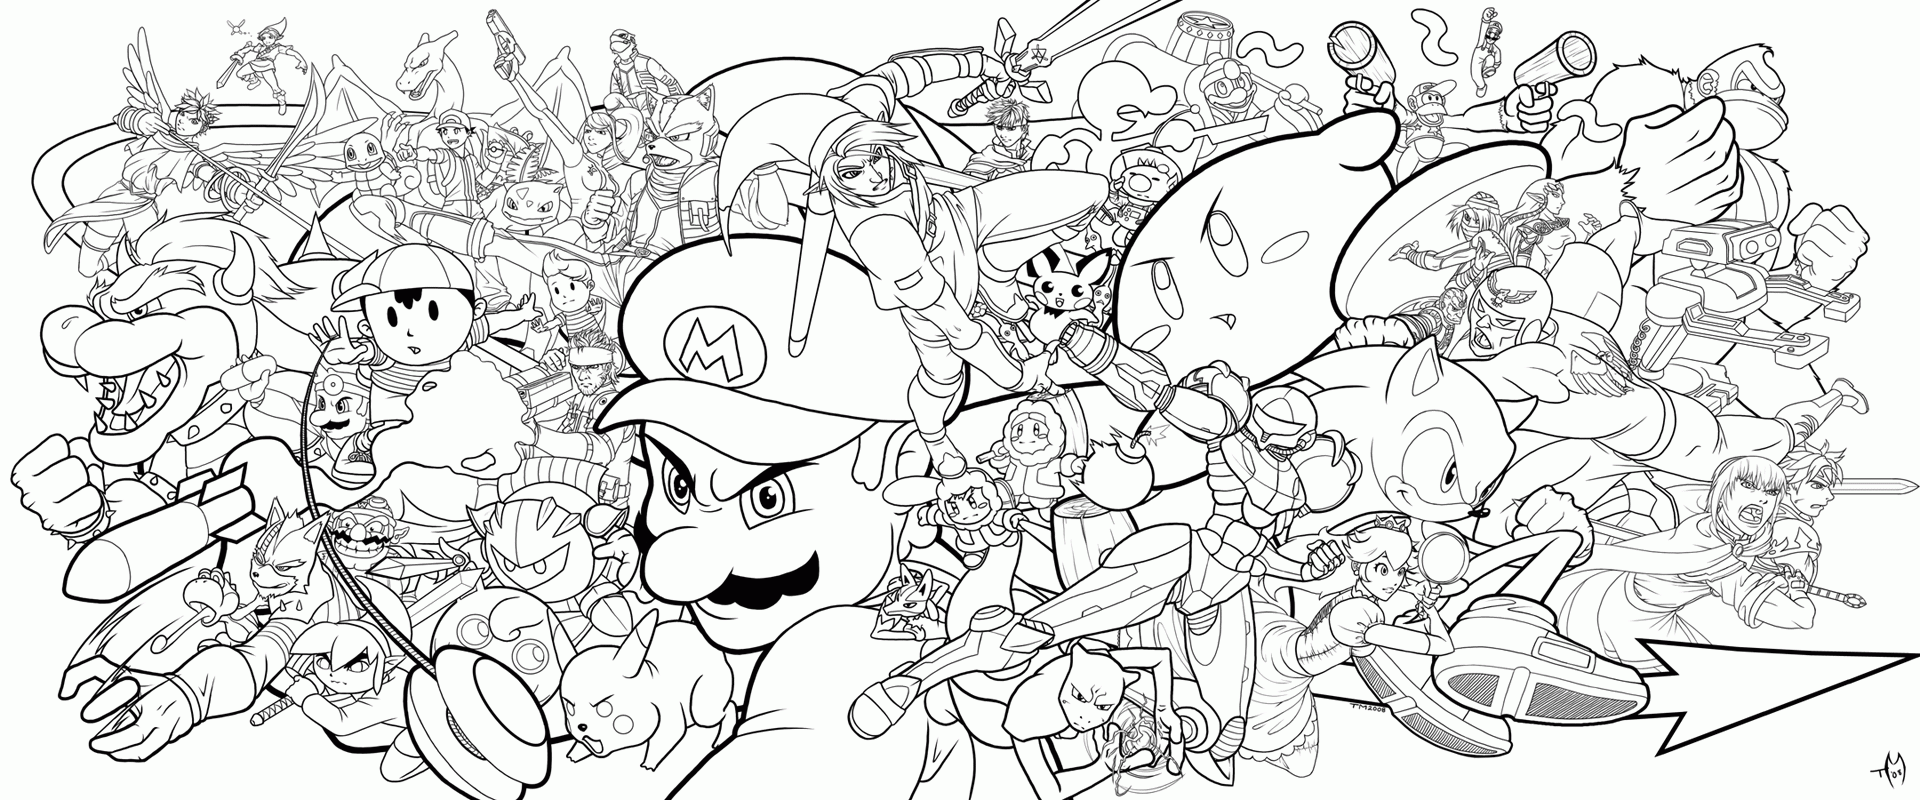 668 Cute Super Smash Bros Coloring Pages with Printable